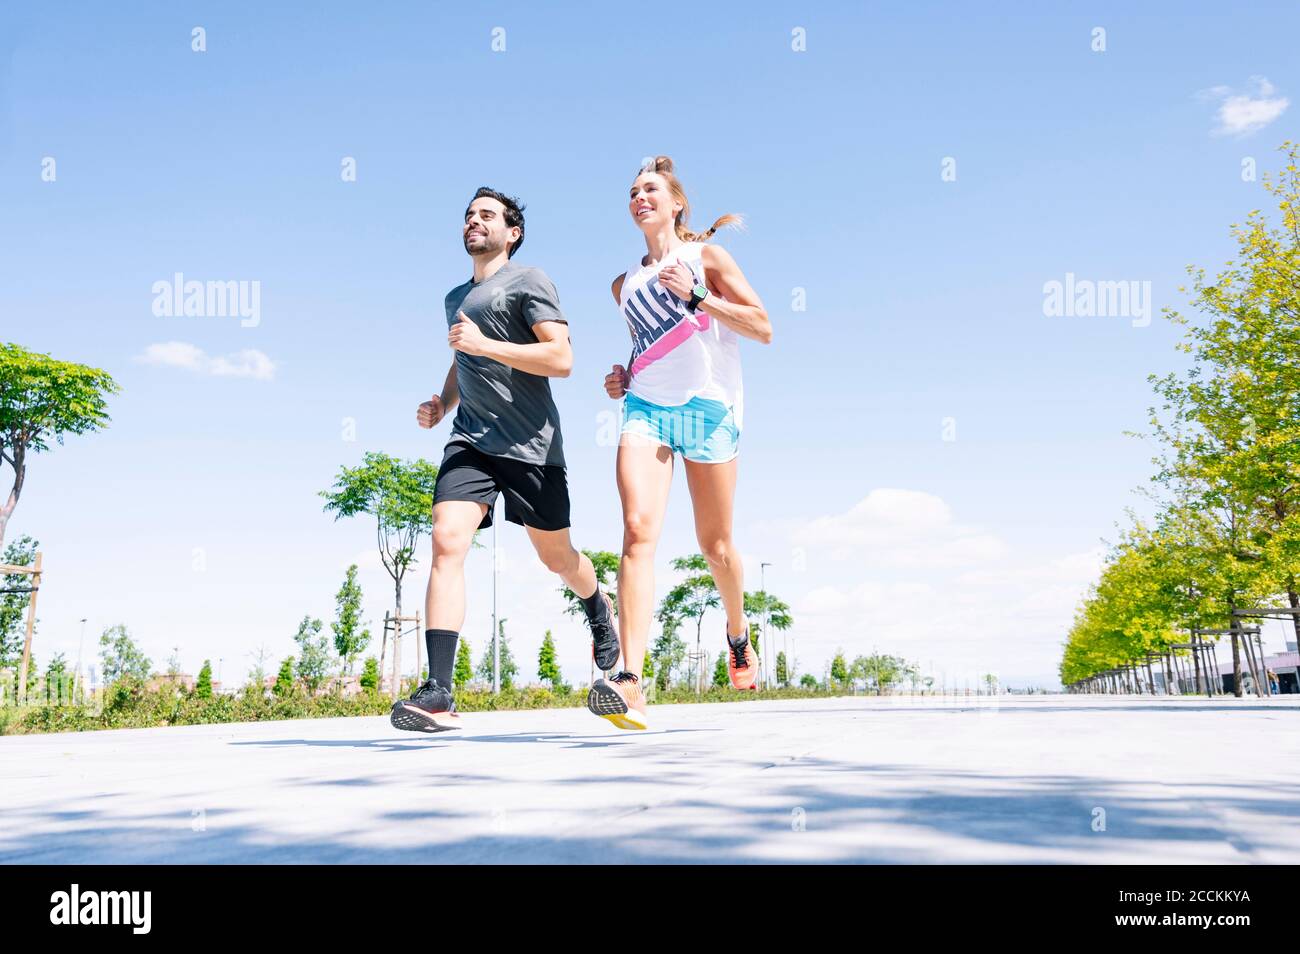 Mid adult couple running on road against blue sky during sunny day Stock Photo